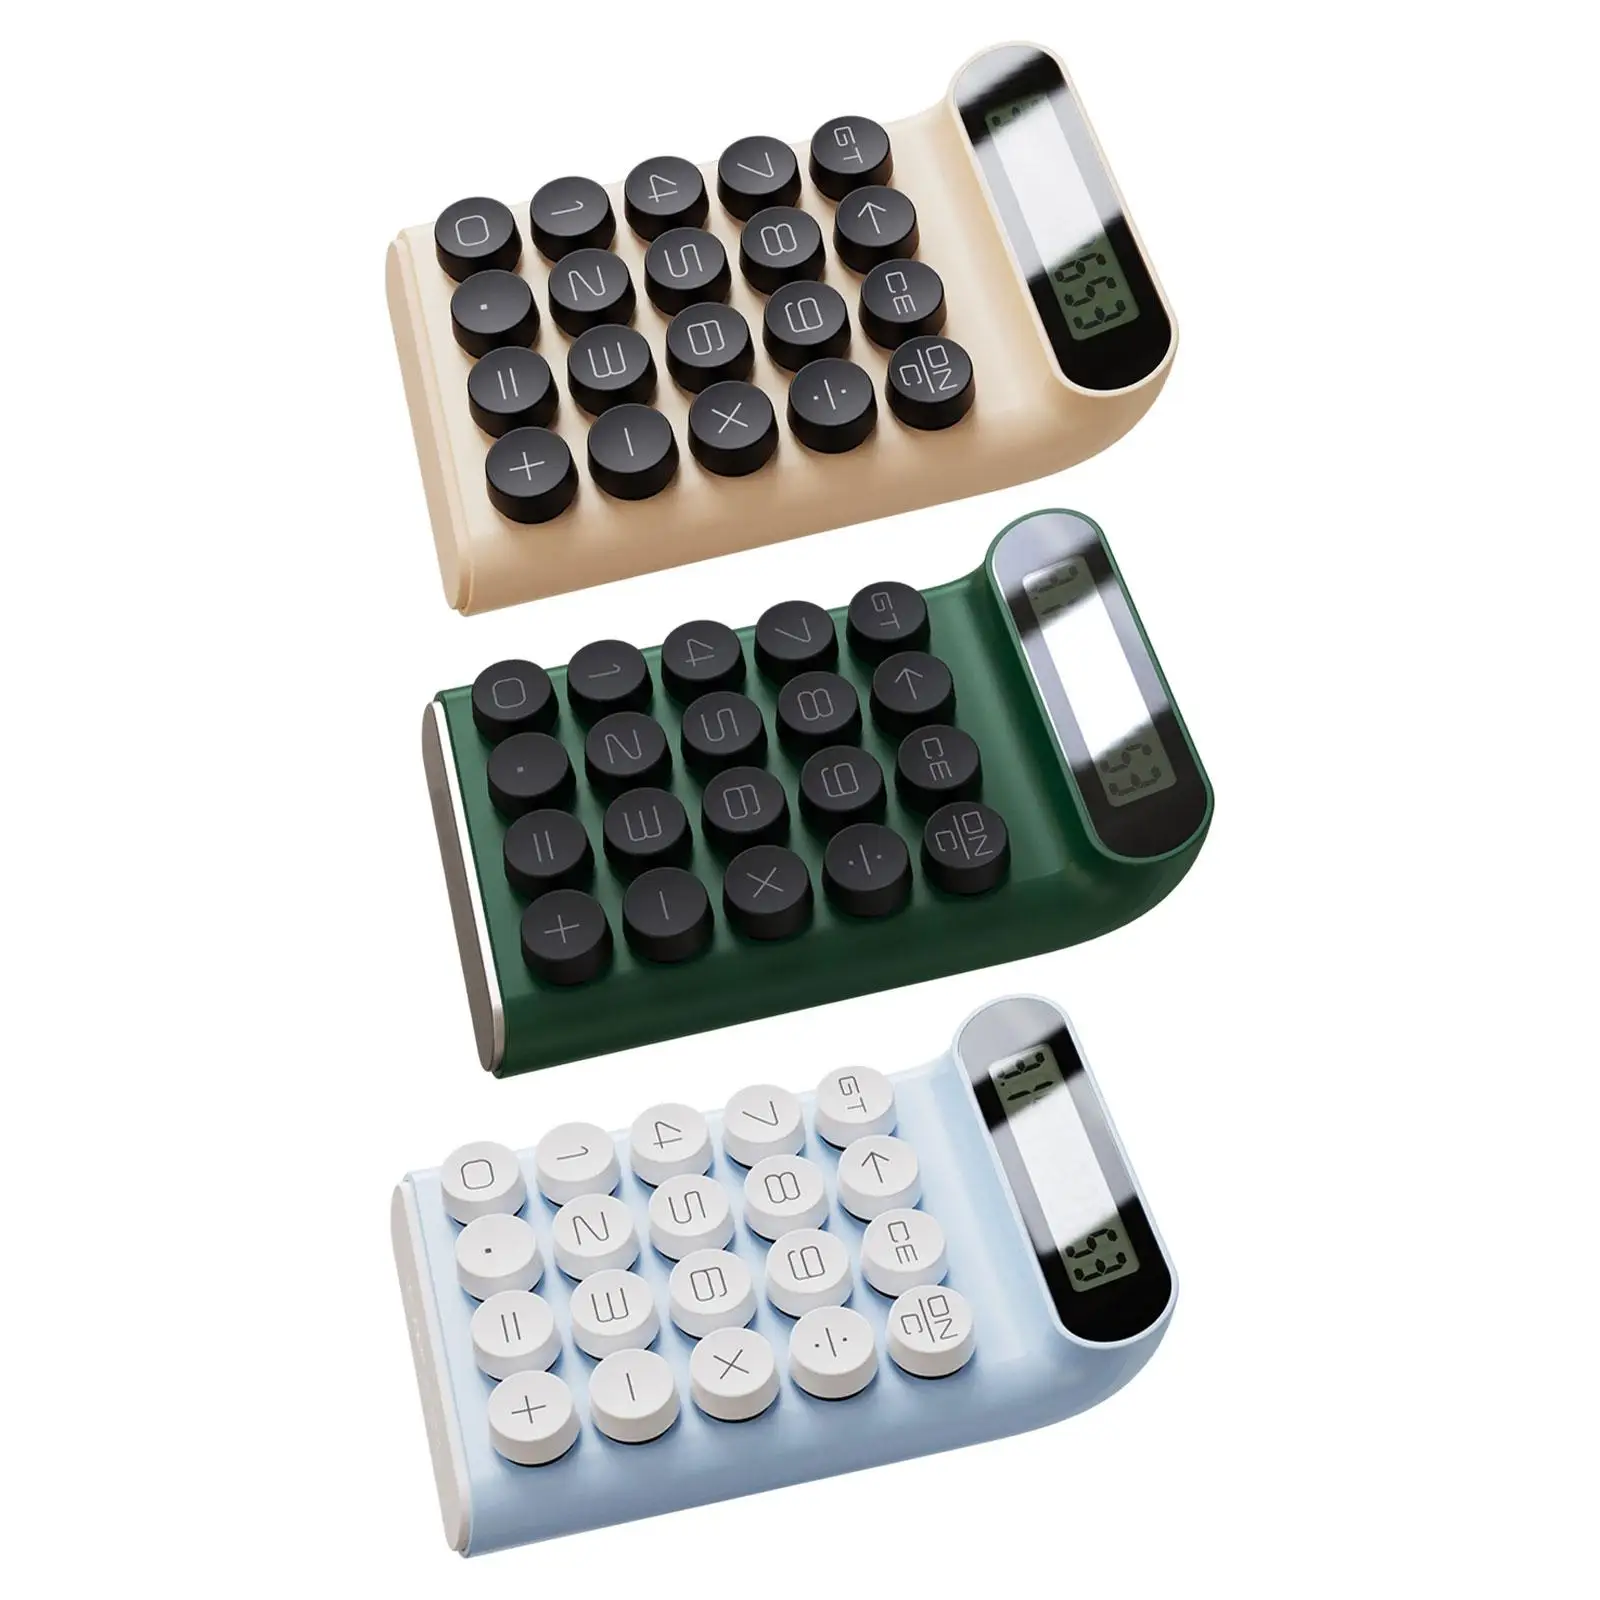 Mechanical Switch Calculator Clear Sound Curved Corner Line and Edge Big Button Calculator LCD Display Basic Office Calculator